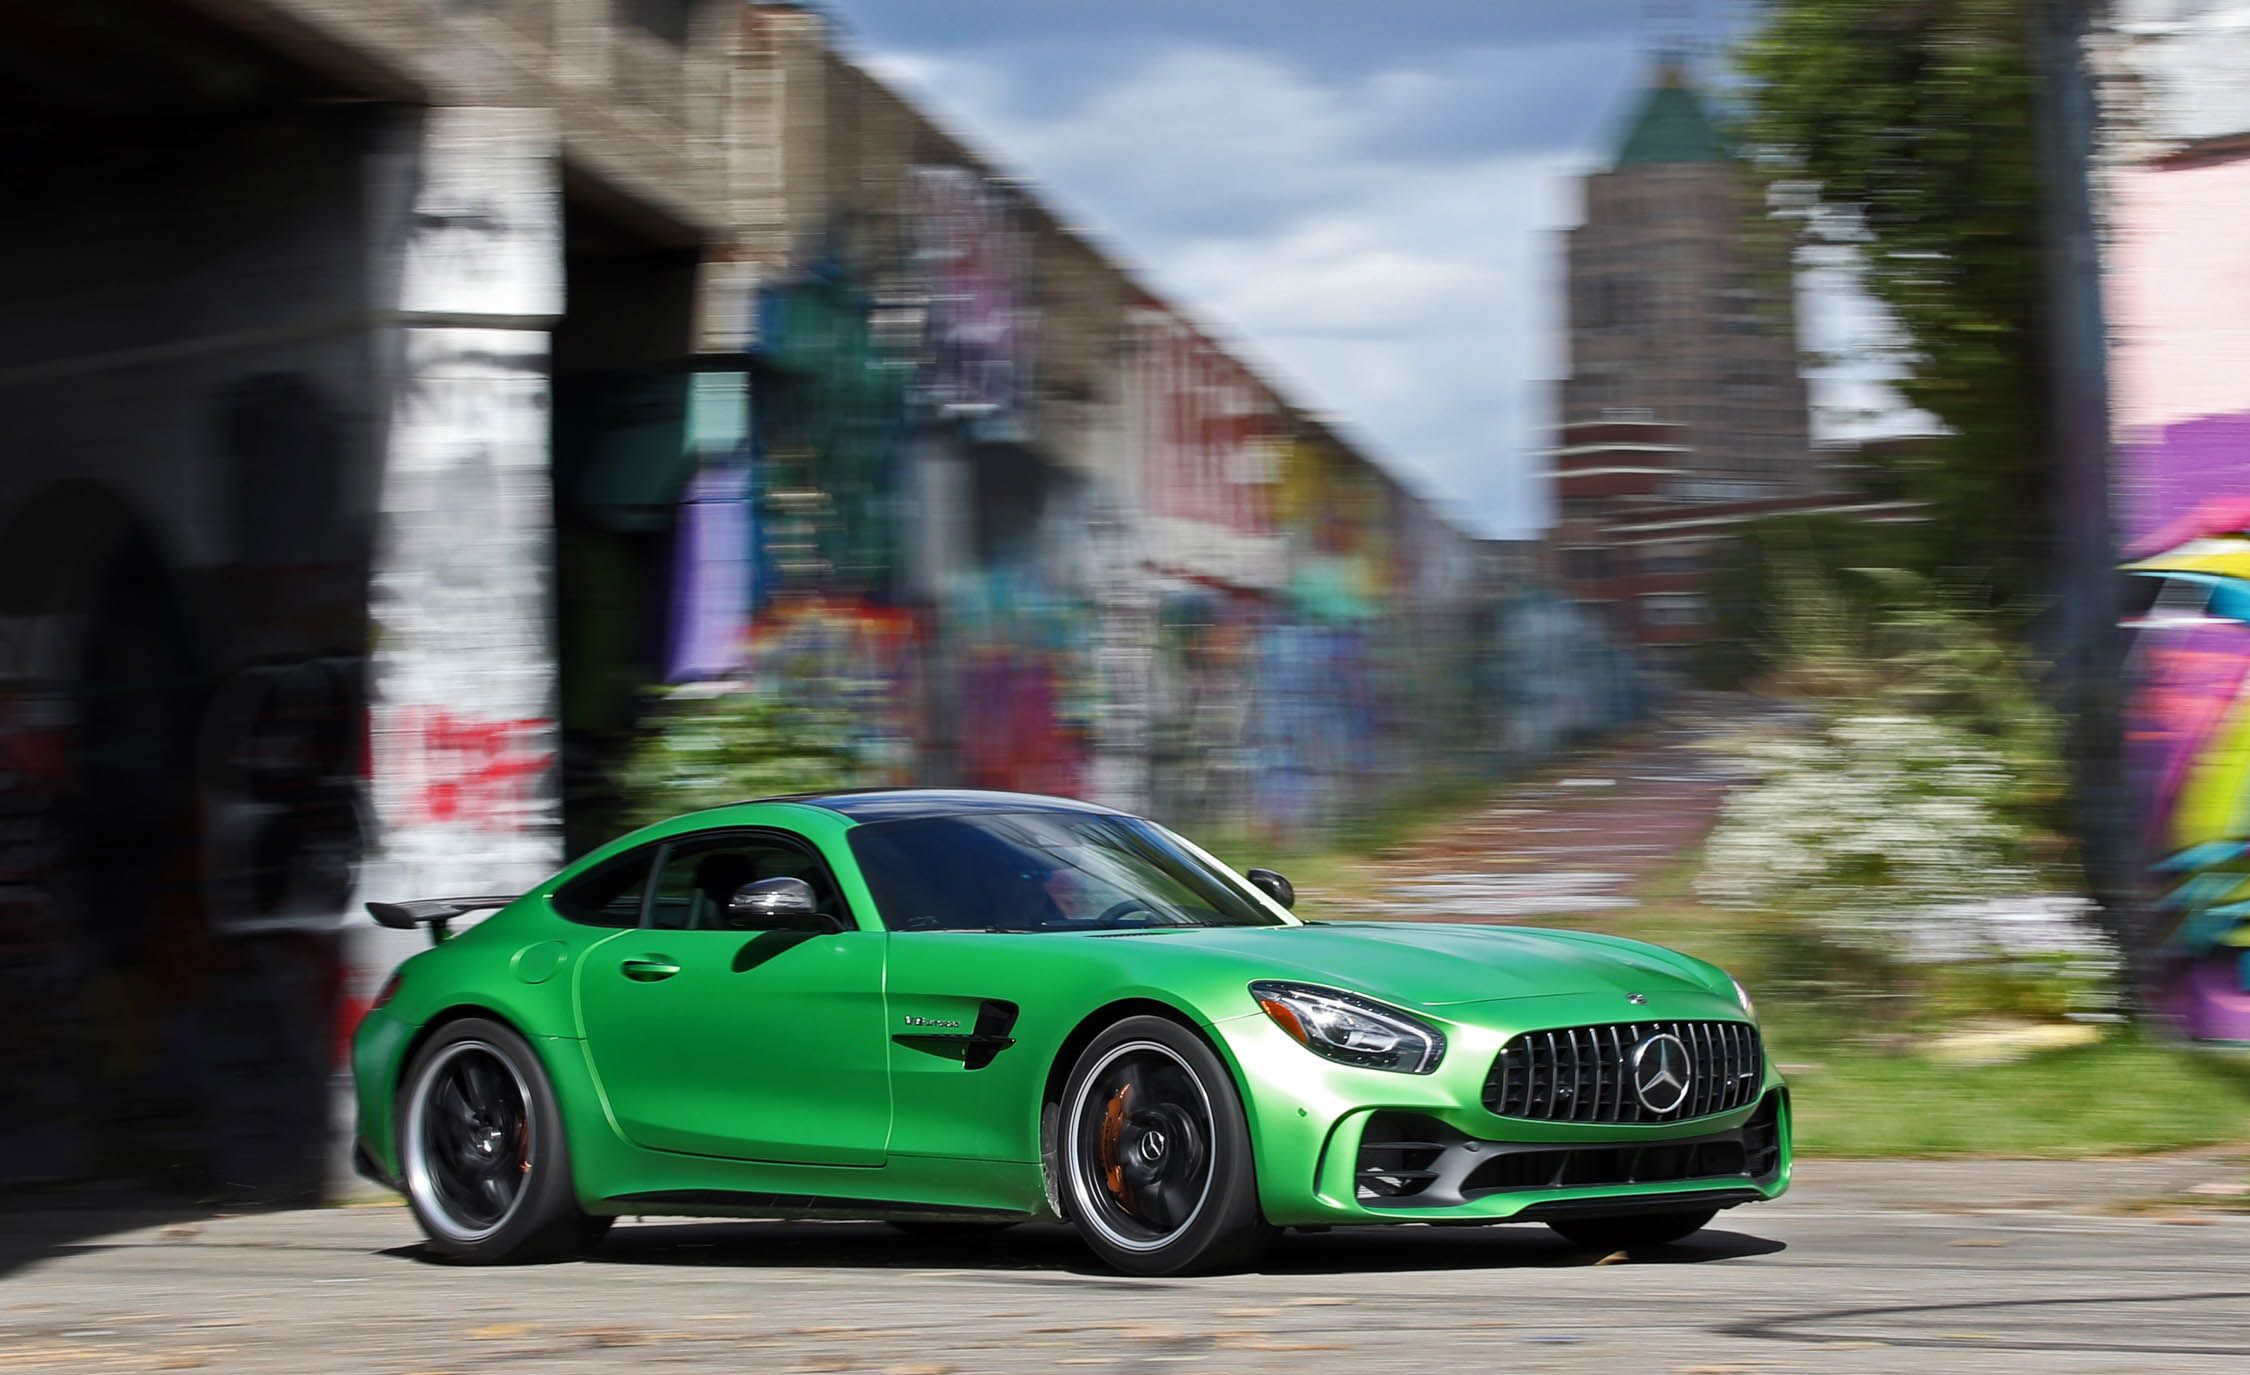 The Fastest Mercedes-Benz AMG Models Under $45,000, Ranked By 0-60 MPH